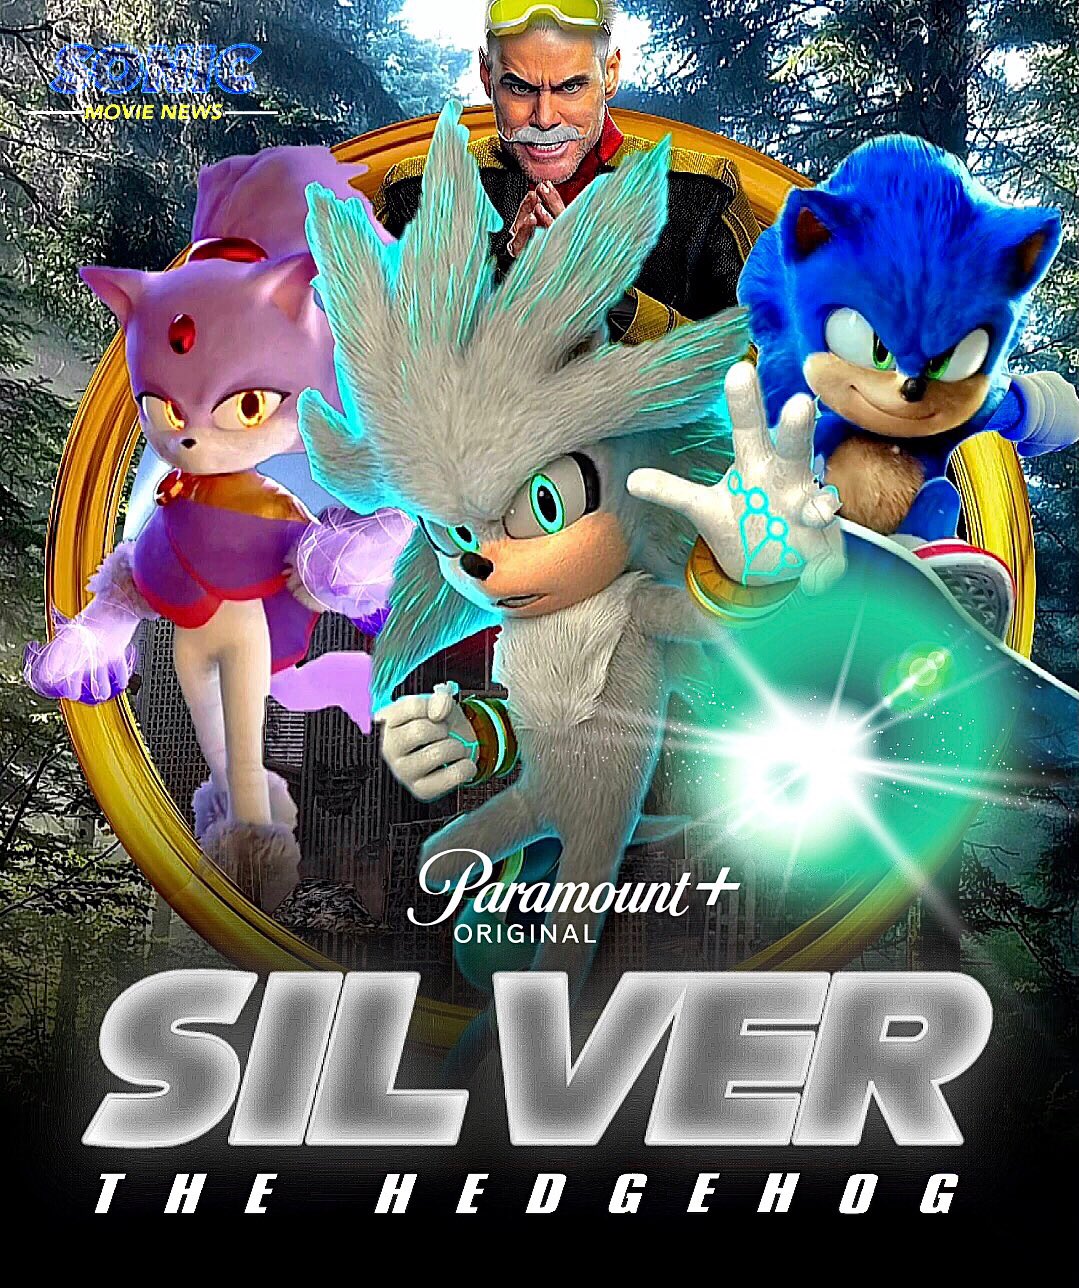 Sonic movienews on X: How would the plot be if you got the chance to  produce this? 👀🔥🤍 #sonic #SonicTheHedeghog #sonicmovie #SonicMovie3  #sonicmovie4 #sonic4 #KnucklesTheEchidna #Shadowthehedgehog #blazethecat  #AmyRose #silverthehedgehog